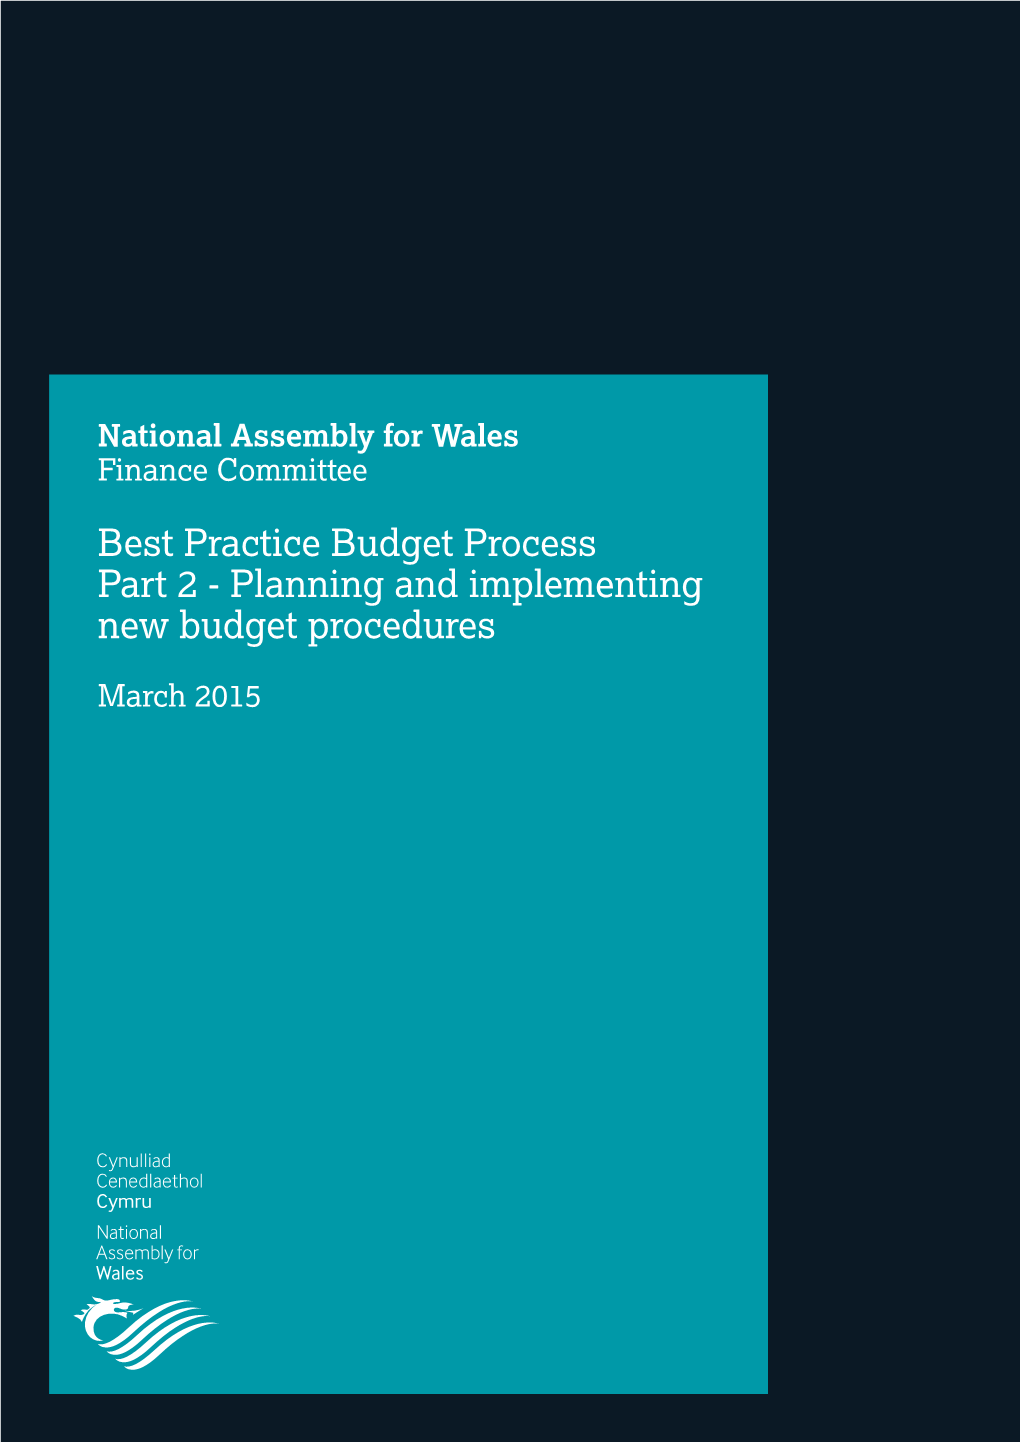 Best Practice Budget Process Part 2 - Planning and Implementing New Budget Procedures